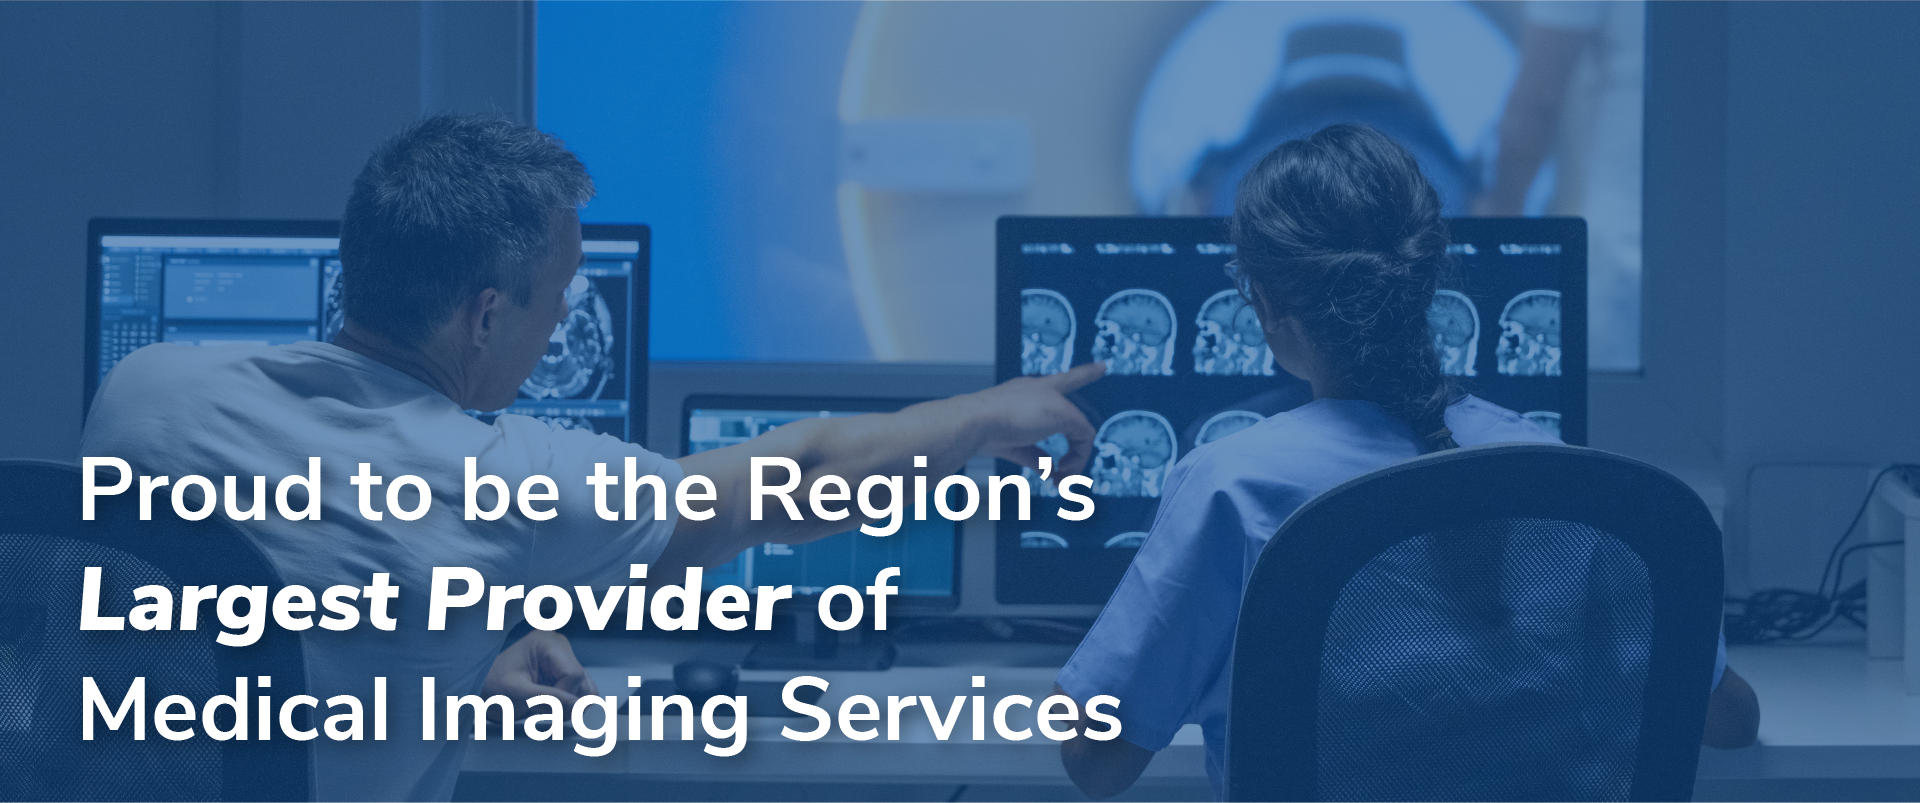 Proud to be the Region's Largest Provider of Medical Imaging Services